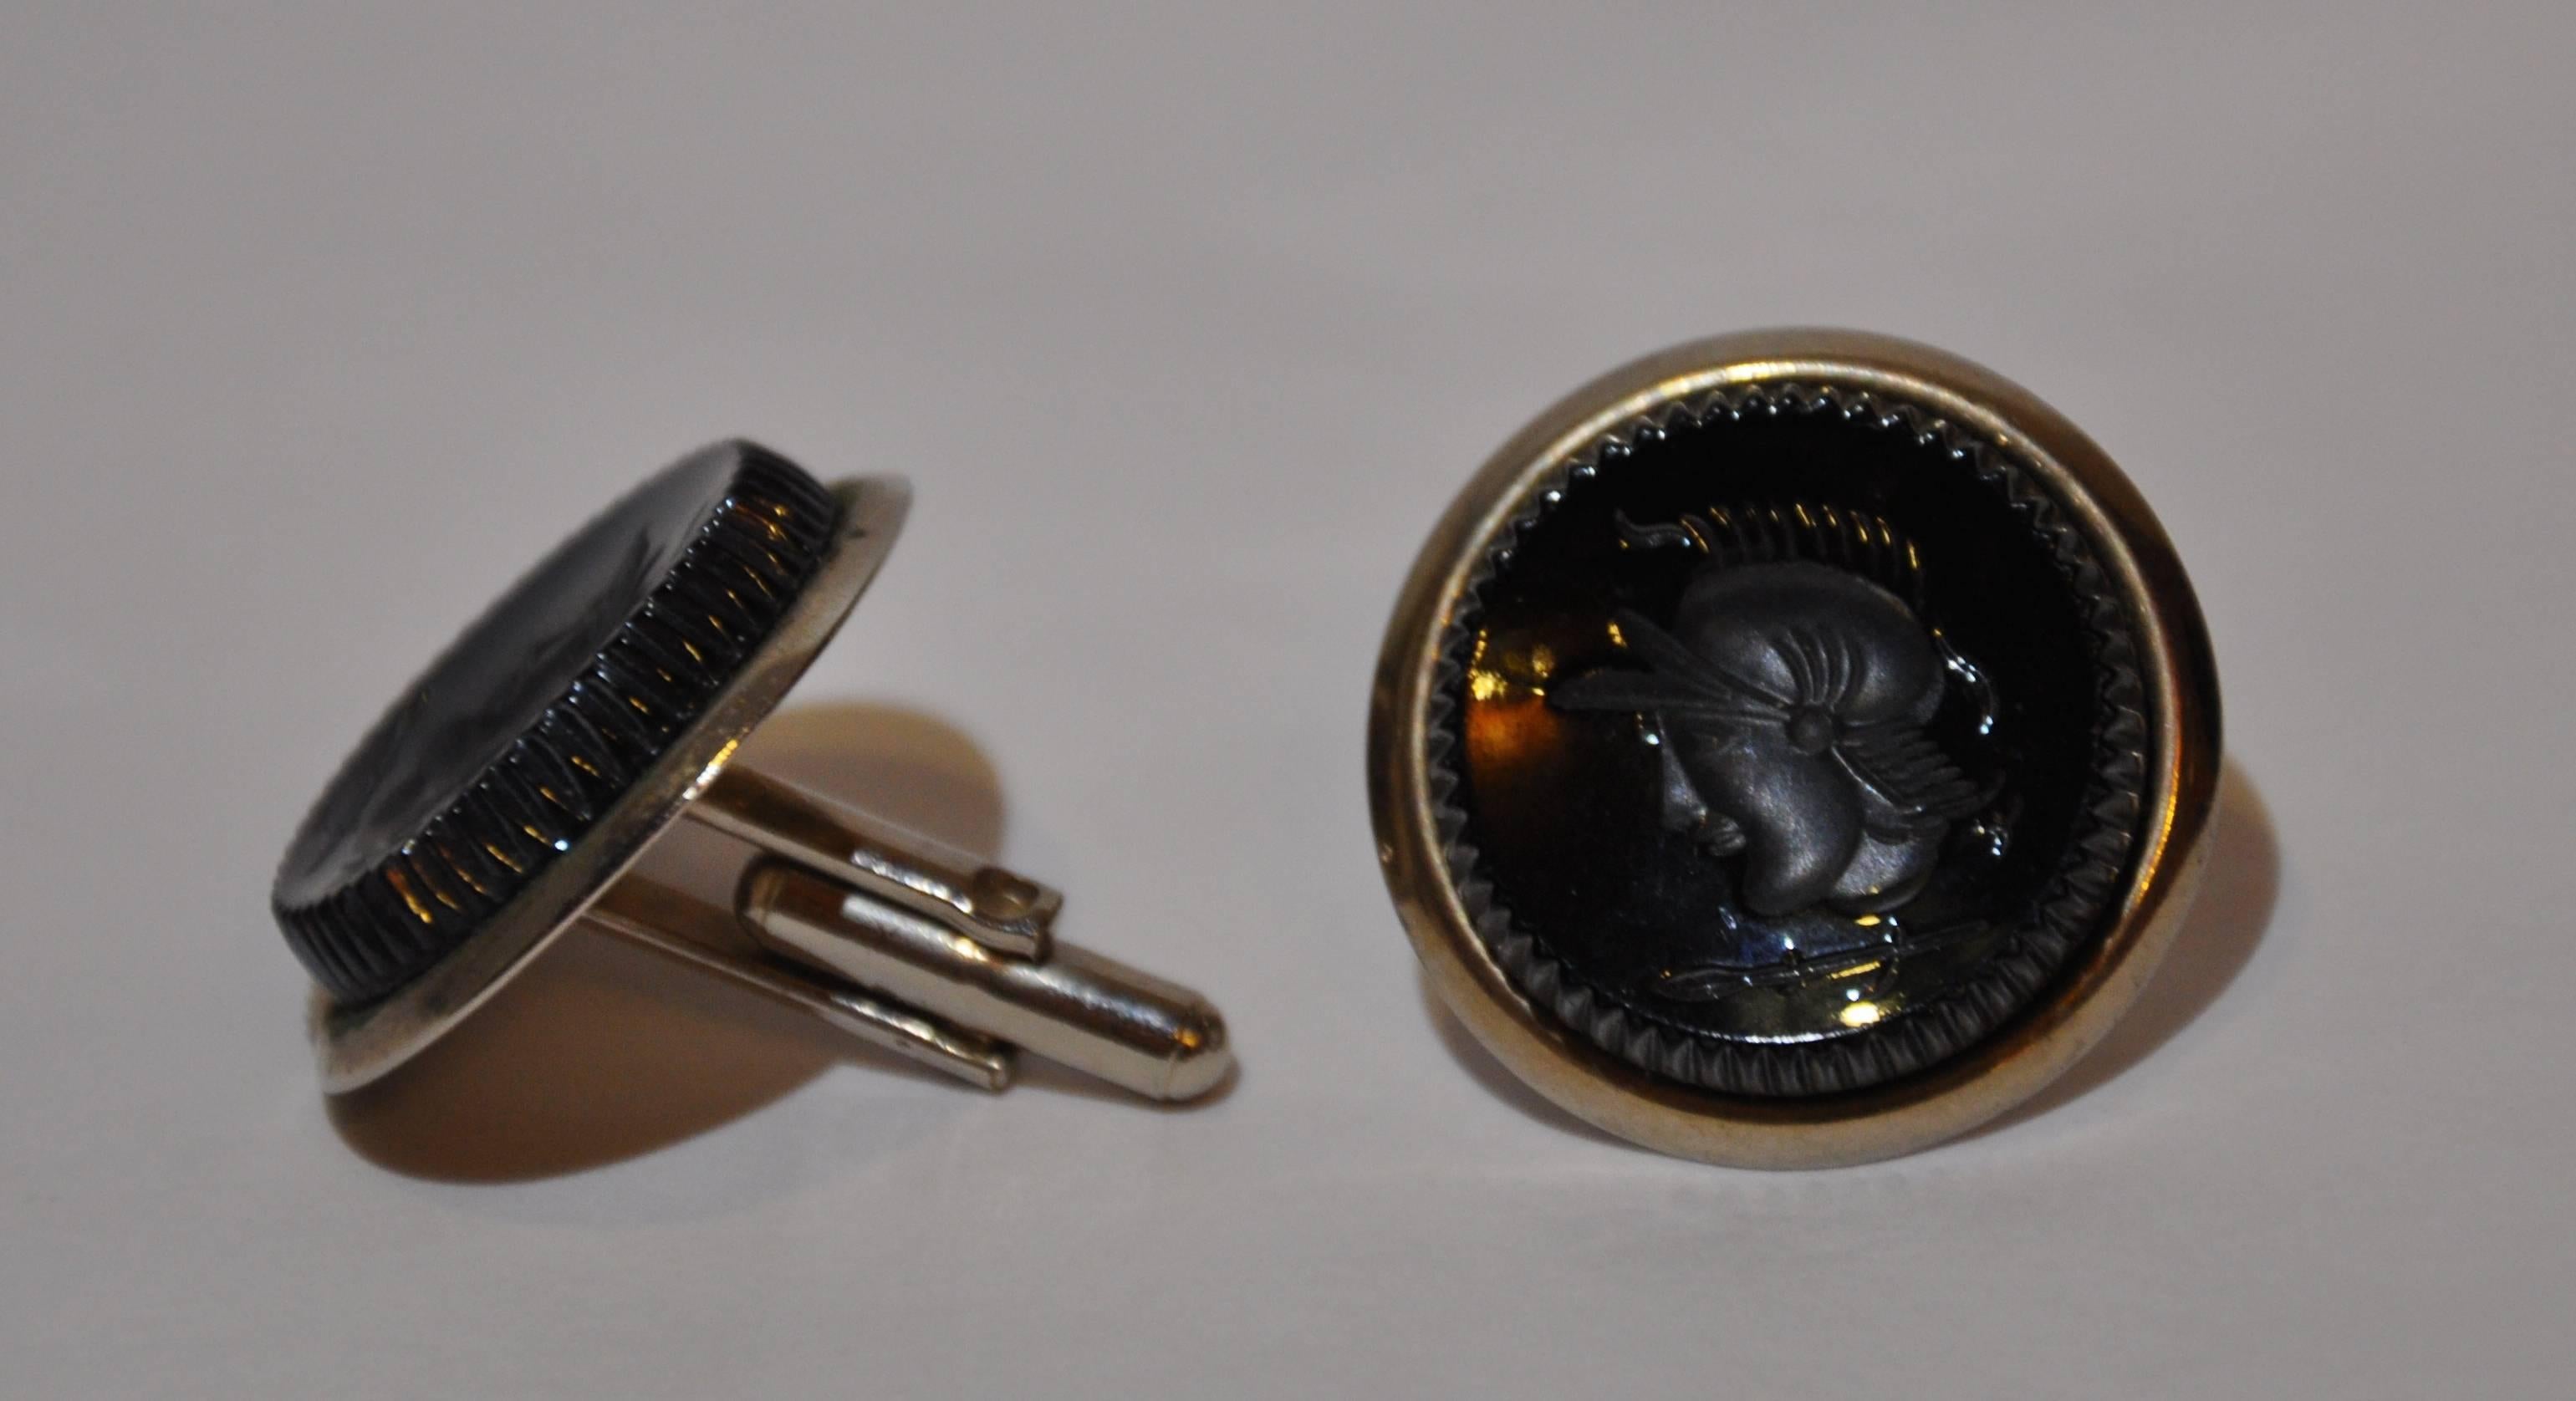        These wonderful large gold tone hardware cufflinks are accented with black pour glass center. They measures 1 1/16" x 1 1/16" with a depth of 1".